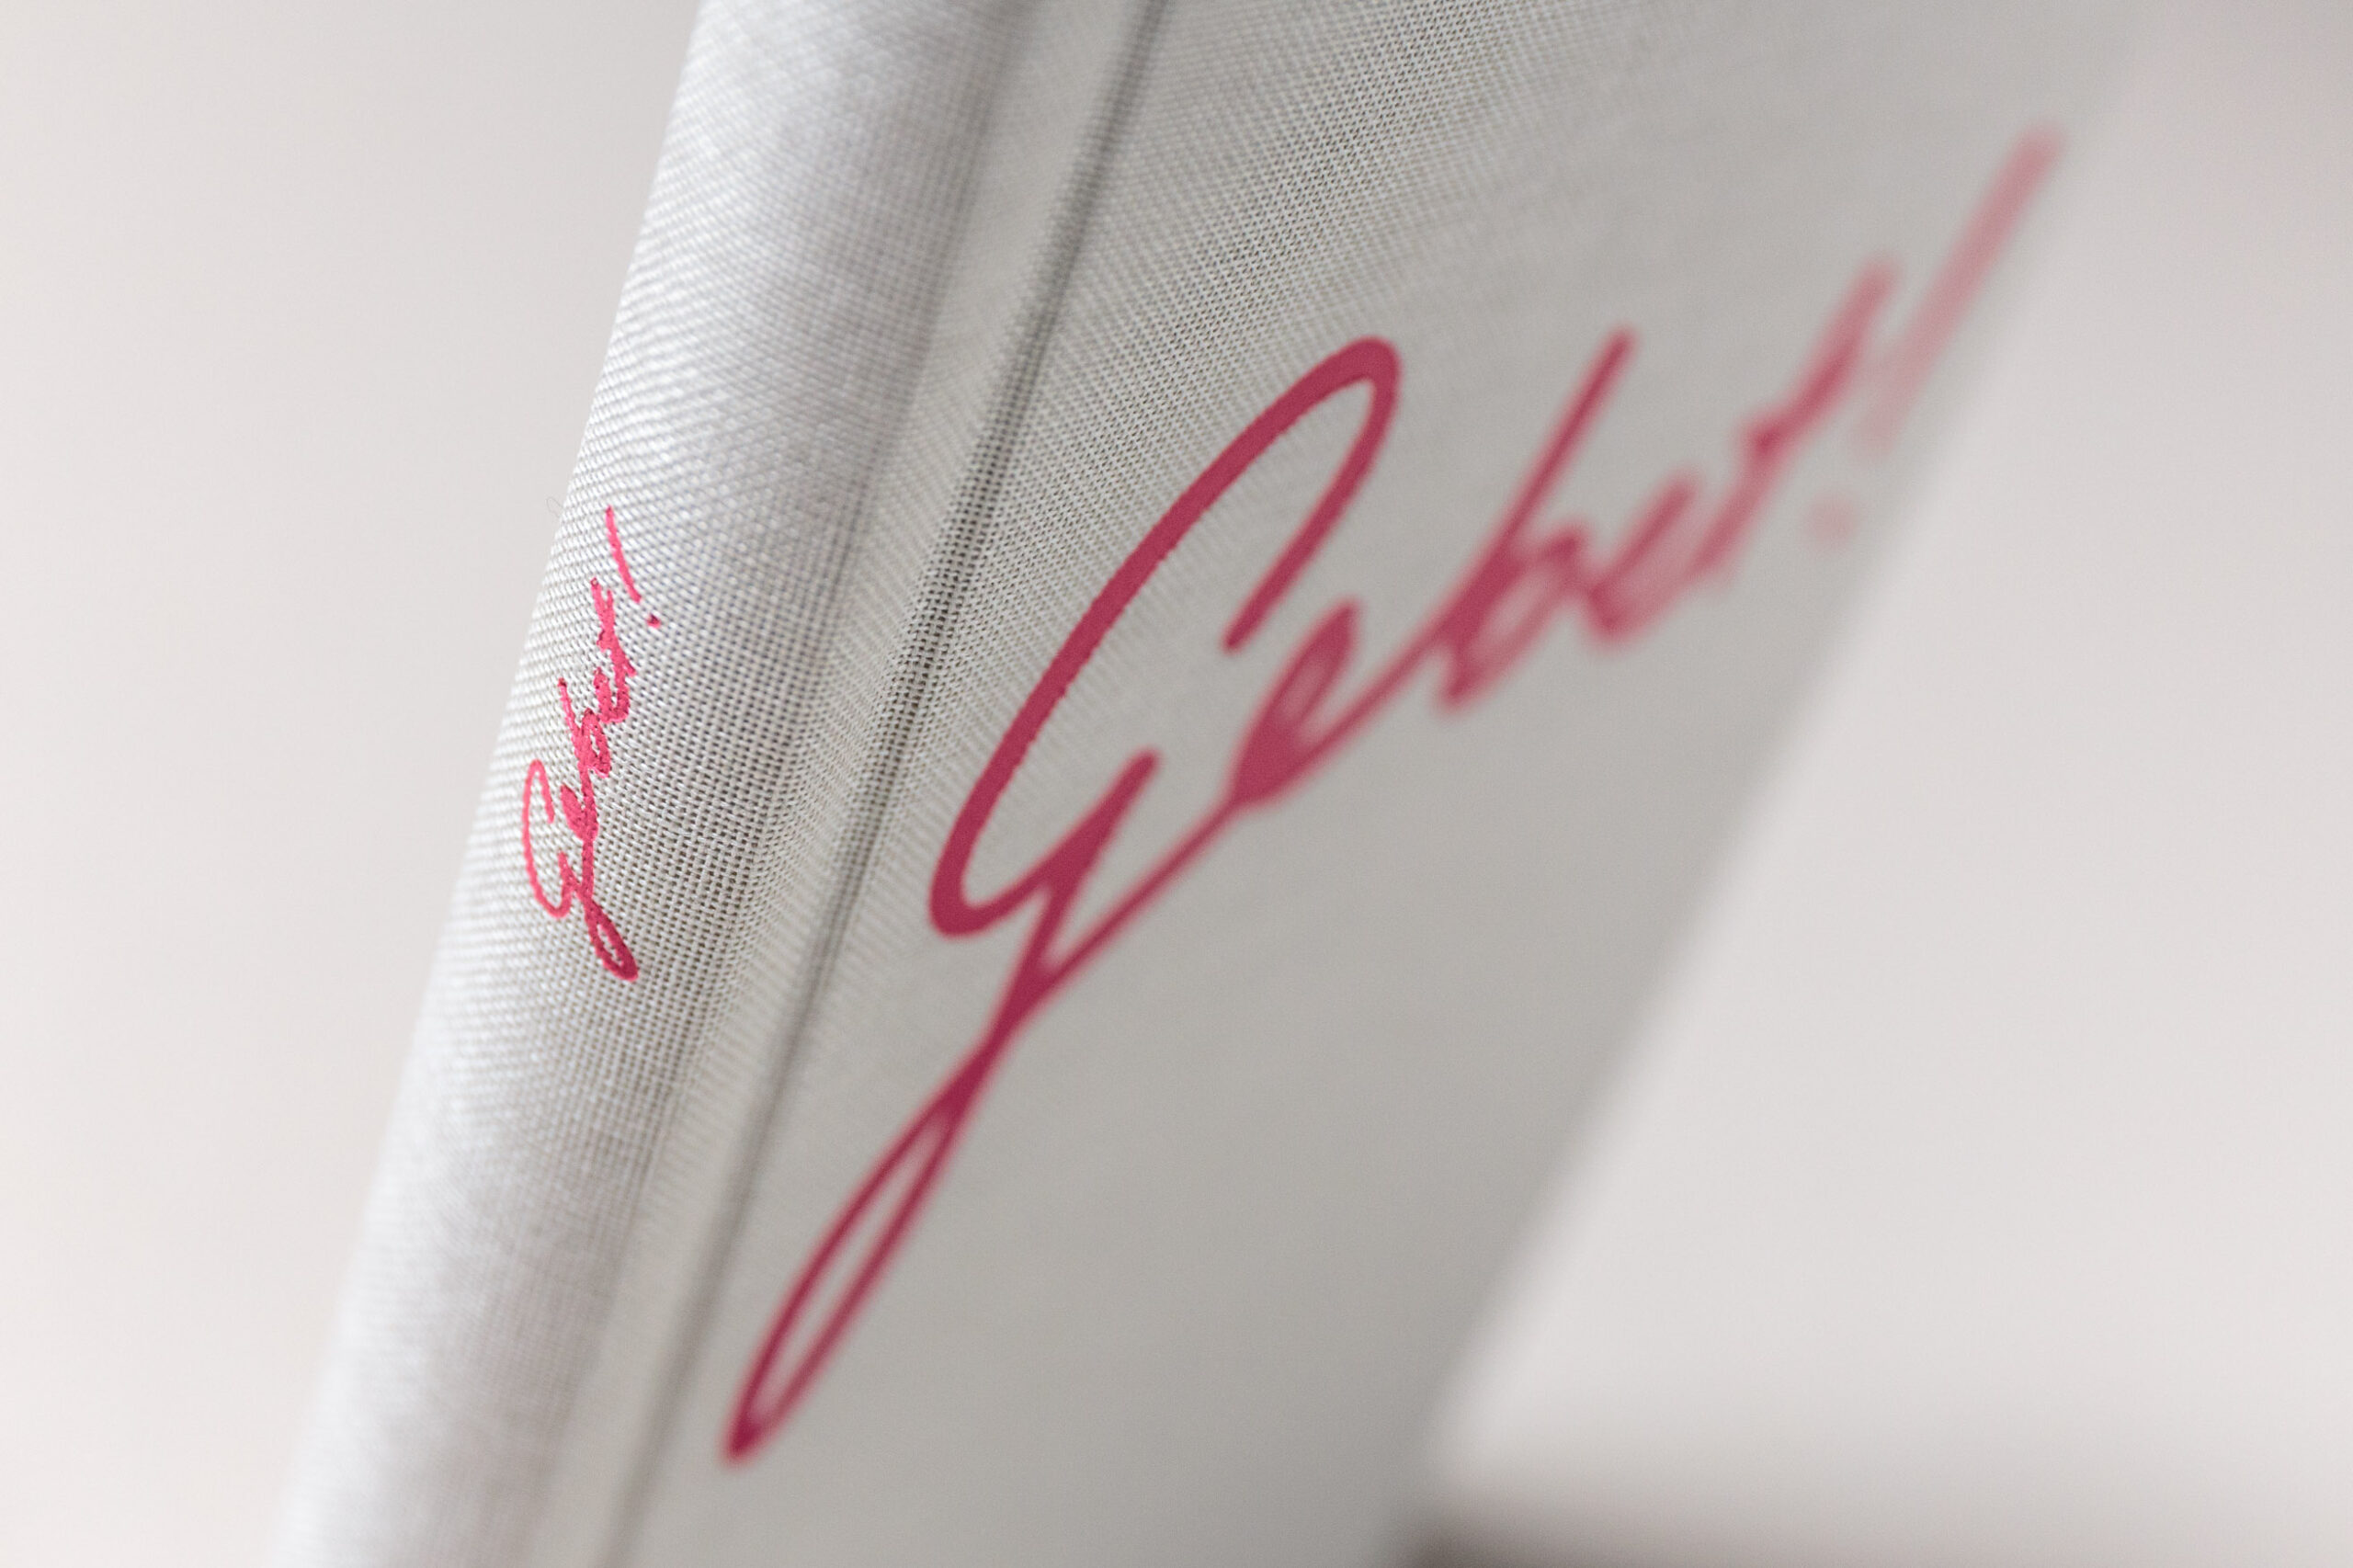 Book cover: Embossing and a warm grey linen binding – “Gebet!” is a prayer book for the scholars of the German Episcopal foundation Cusanuswerk. Set in Freight Text, with Pantone spot color, embossing, linen binding and handwritten content. Designed by Johannes Pistorius